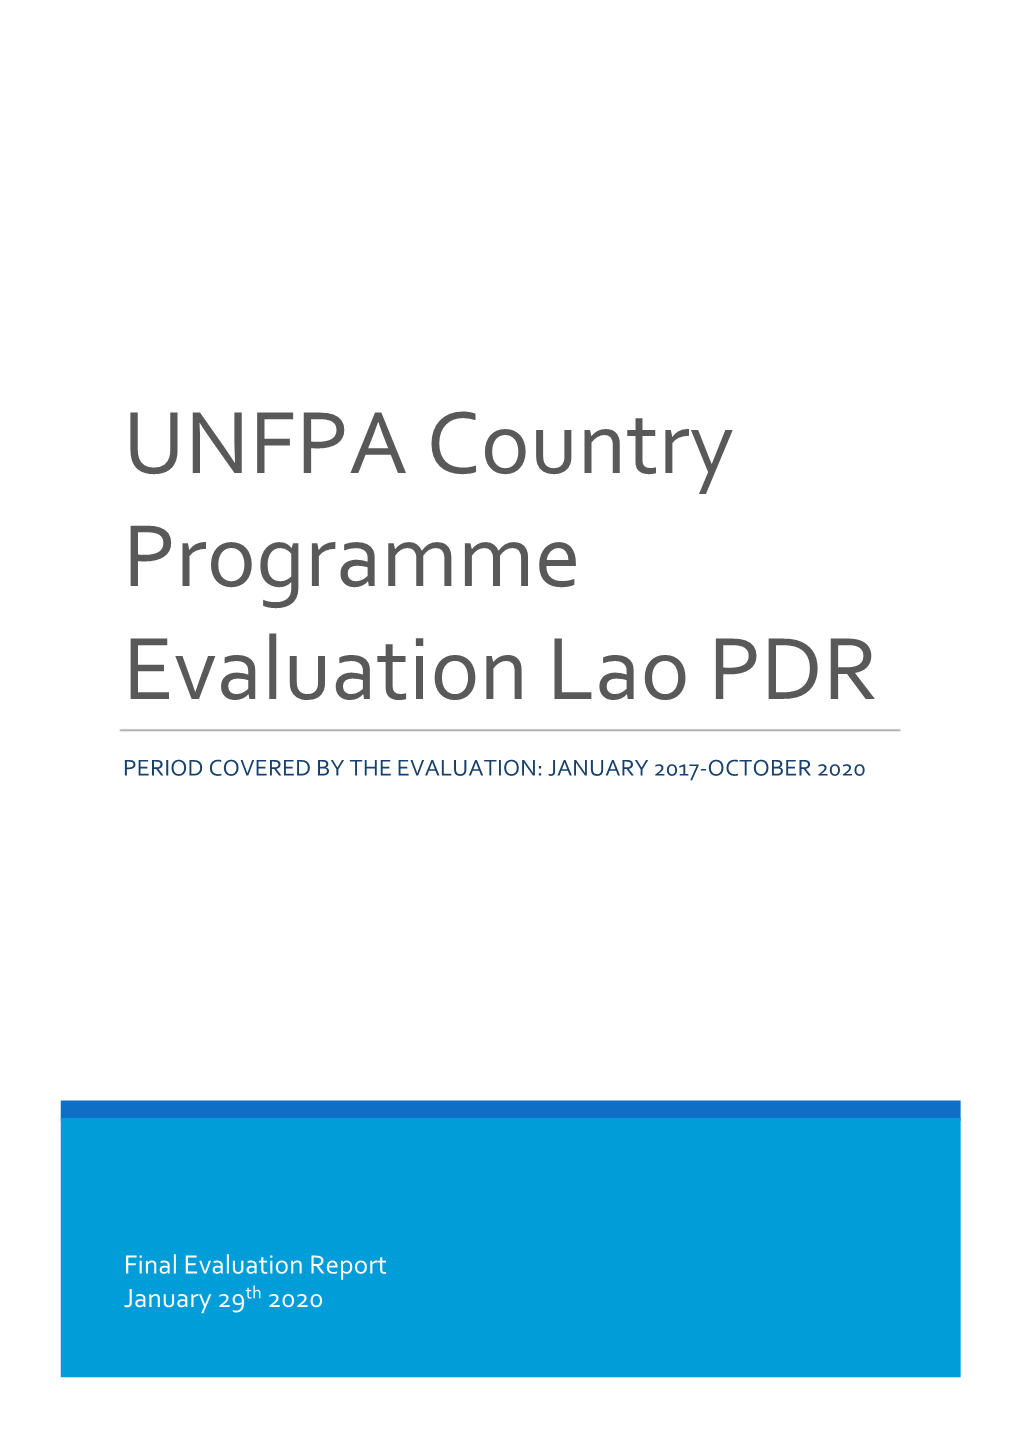 UNFPA Country Programme Evaluation Lao PDR